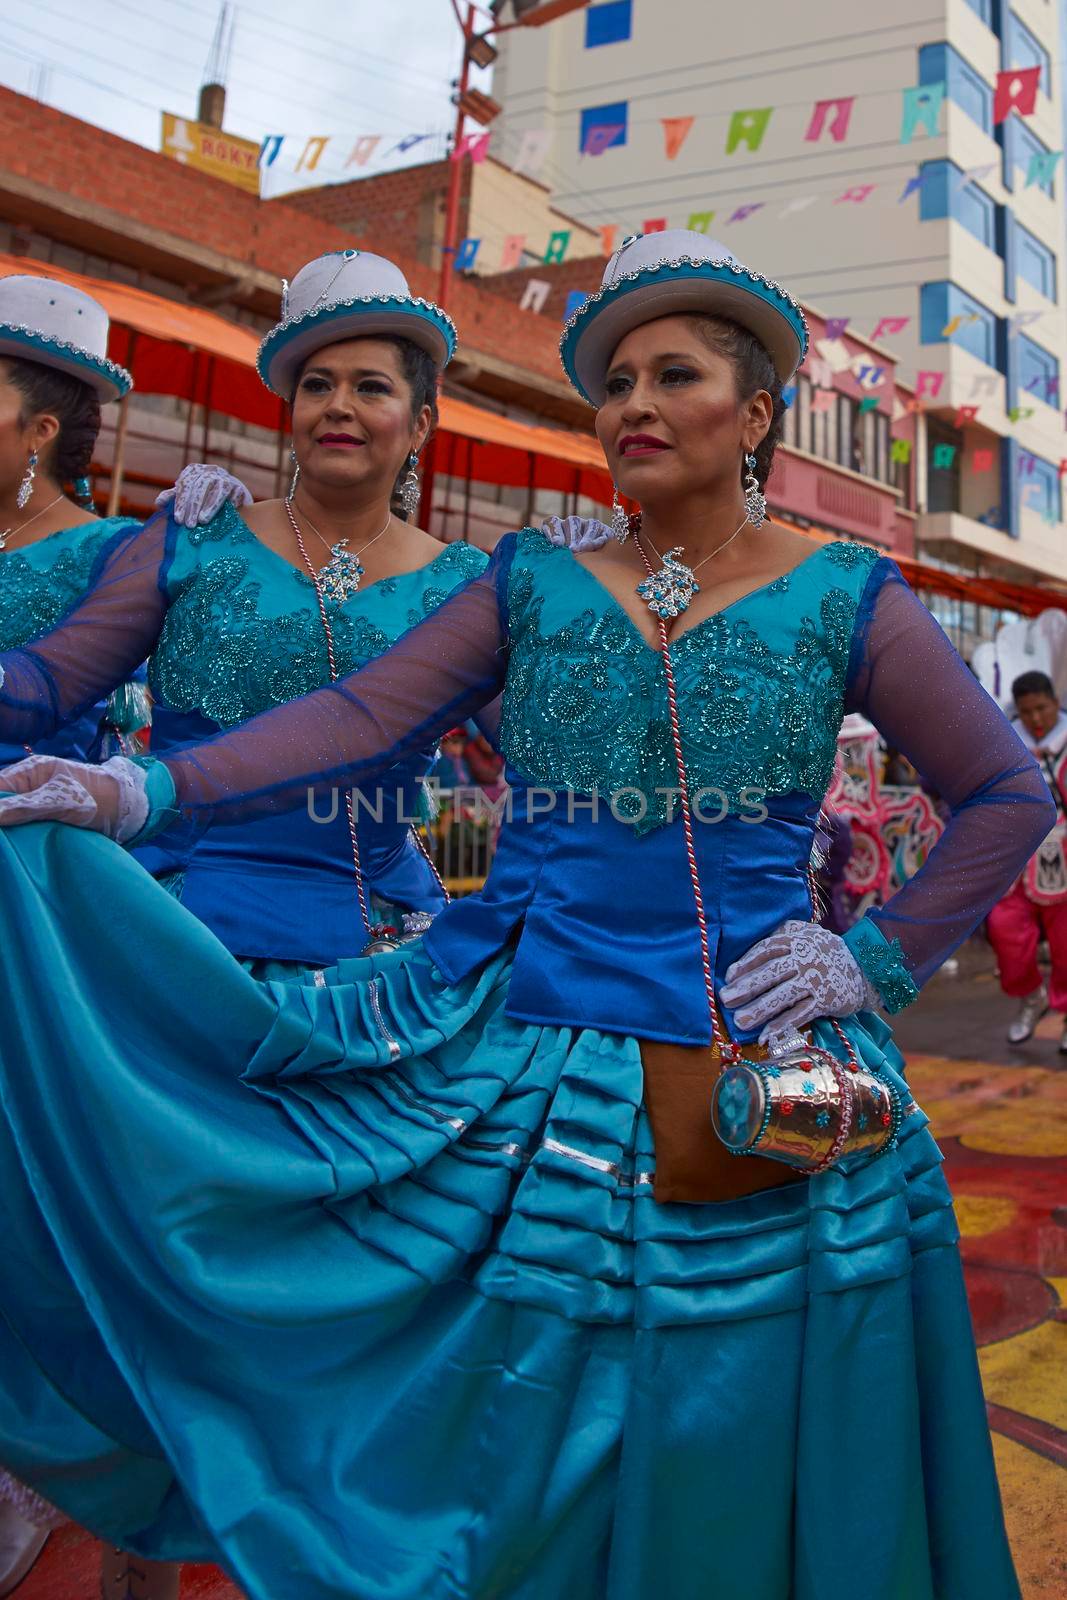 ORURO, BOLIVIA - FEBRUARY 25, 2017: Female Morenada dancers in colourful costumes parading through the mining city of Oruro on the Altiplano of Bolivia during the annual Oruro Carnival.